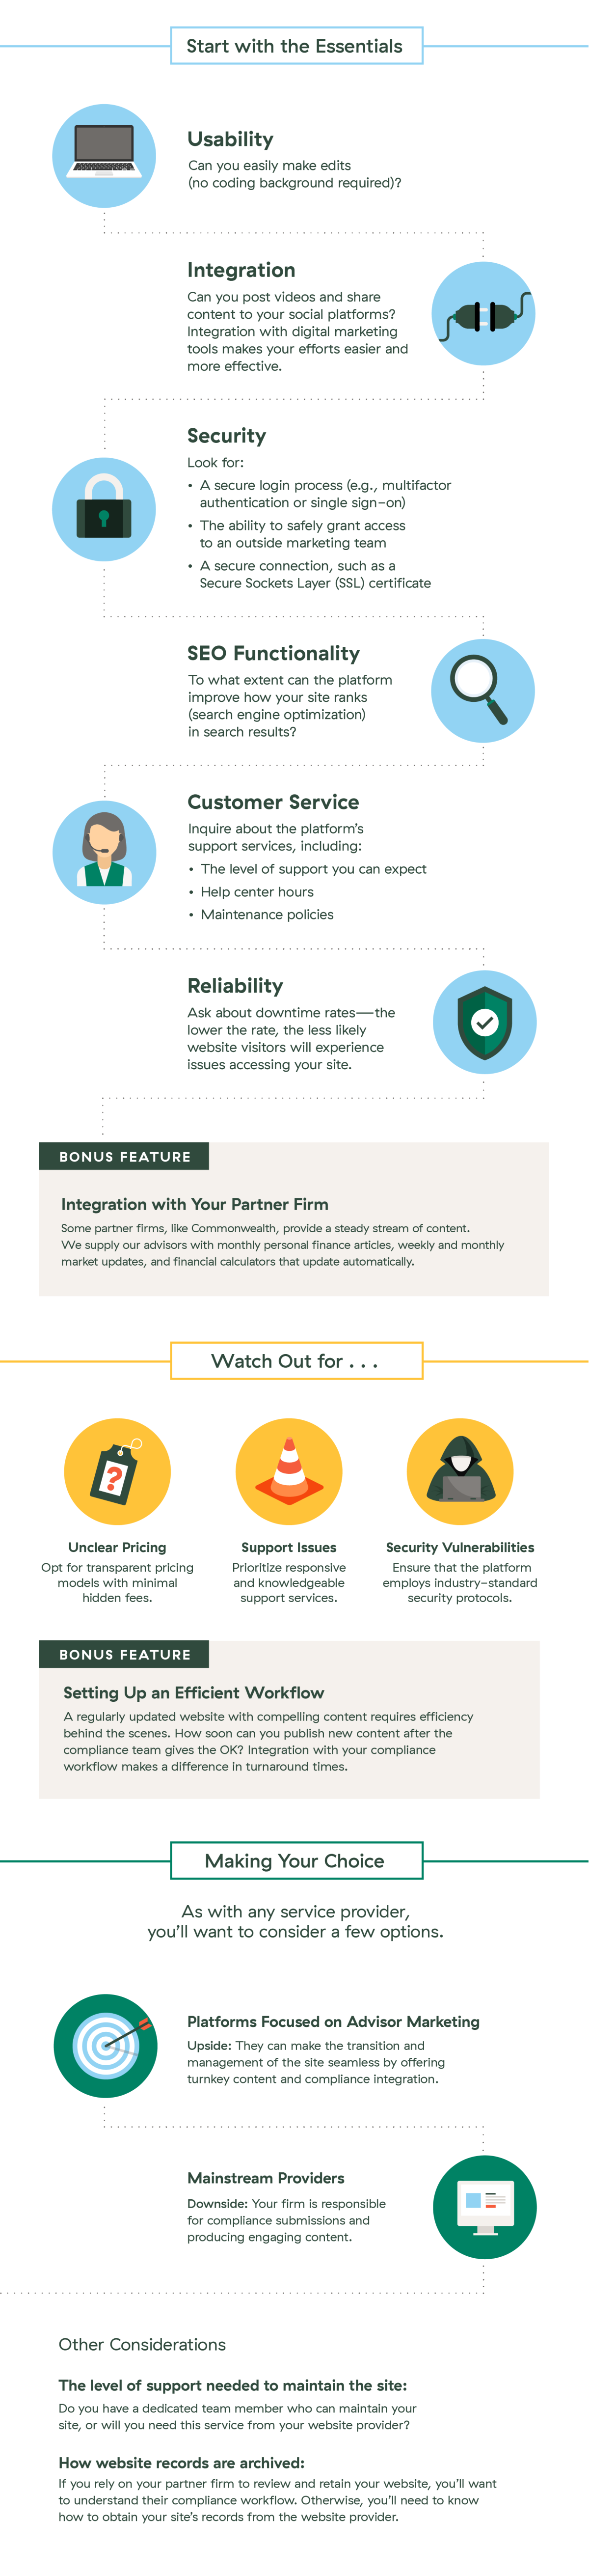 Insights Infographic Test